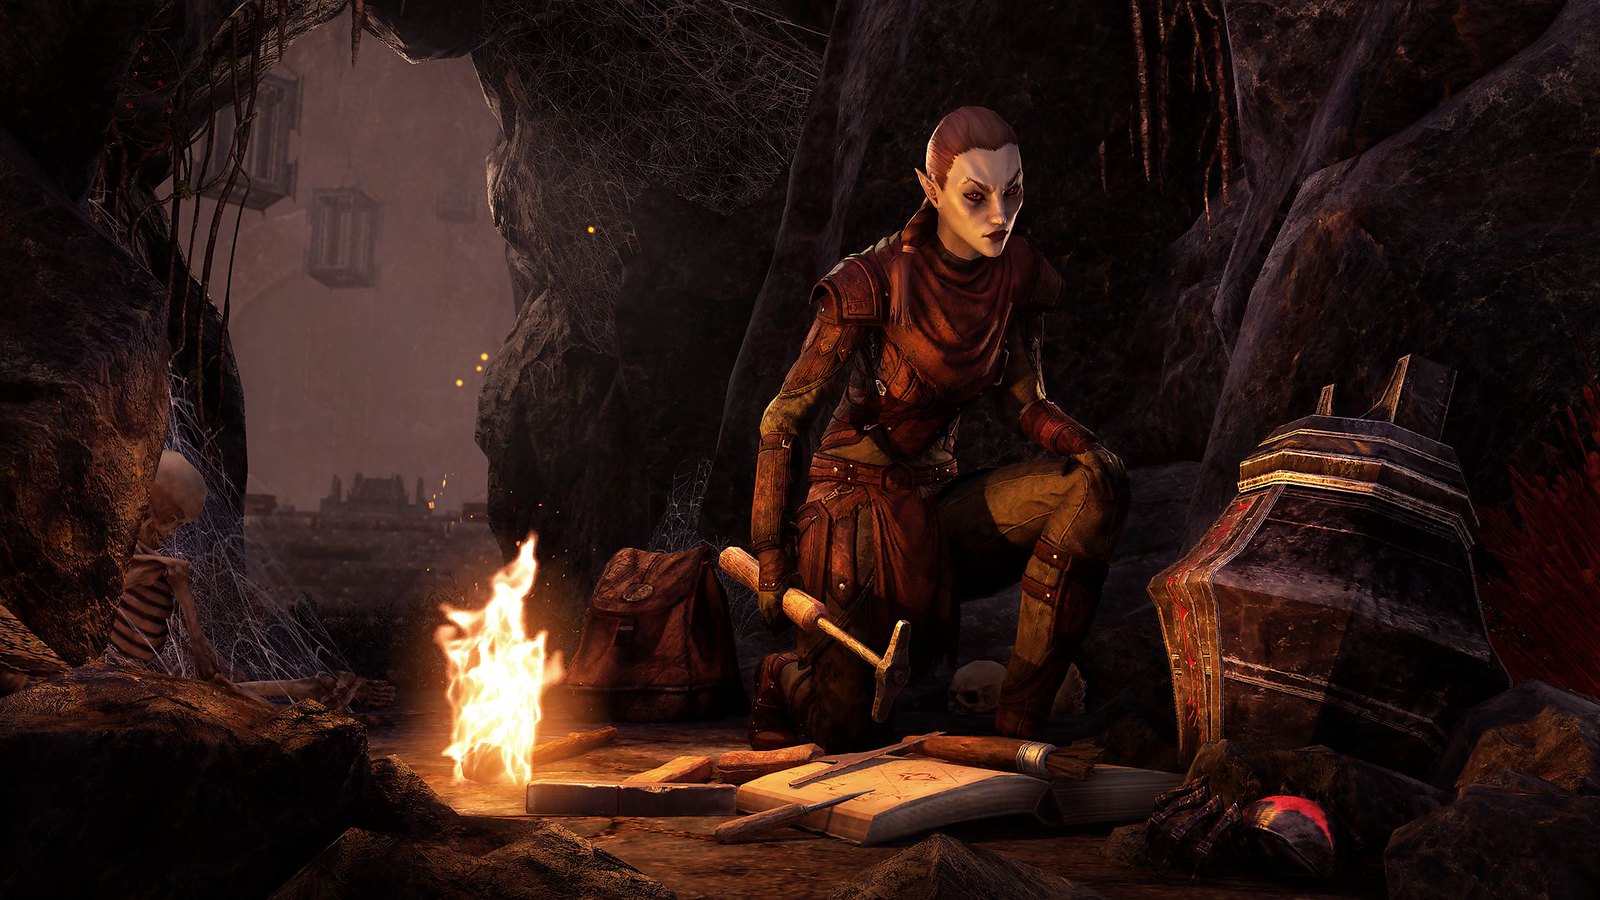 Customizable companions come to The Elder Scrolls Online next month